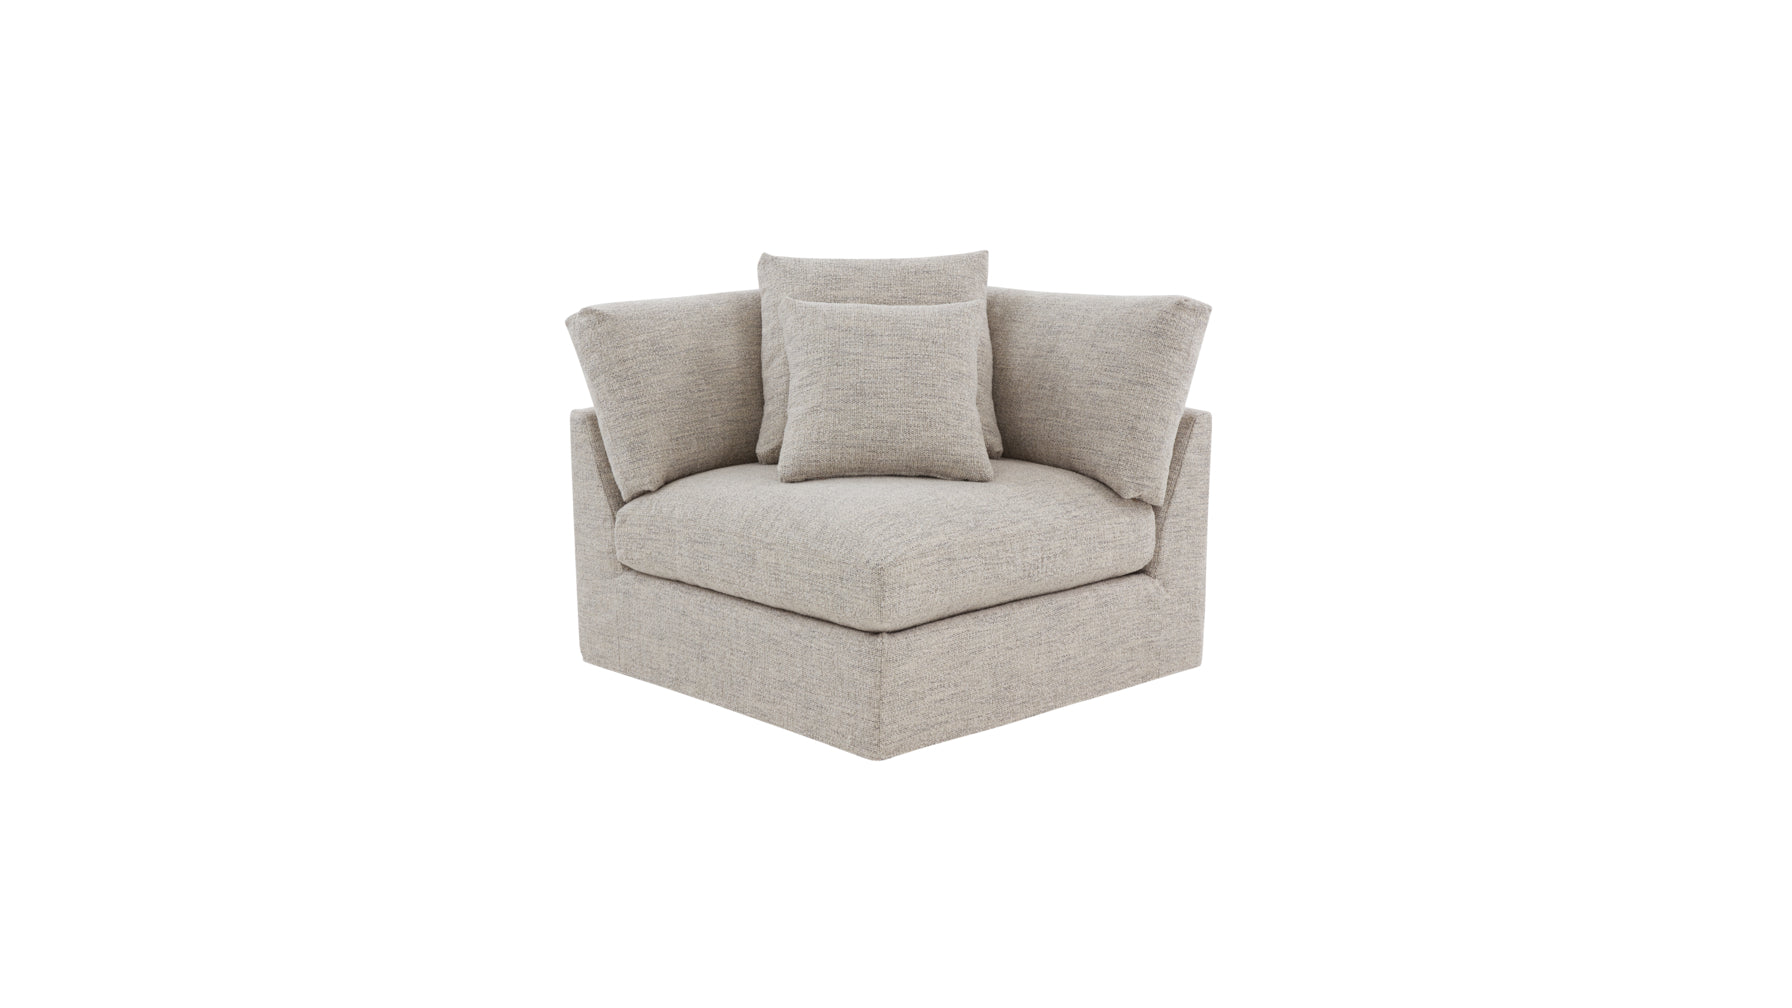 Get Together™ Corner Chair, Large, Oatmeal - Image 2